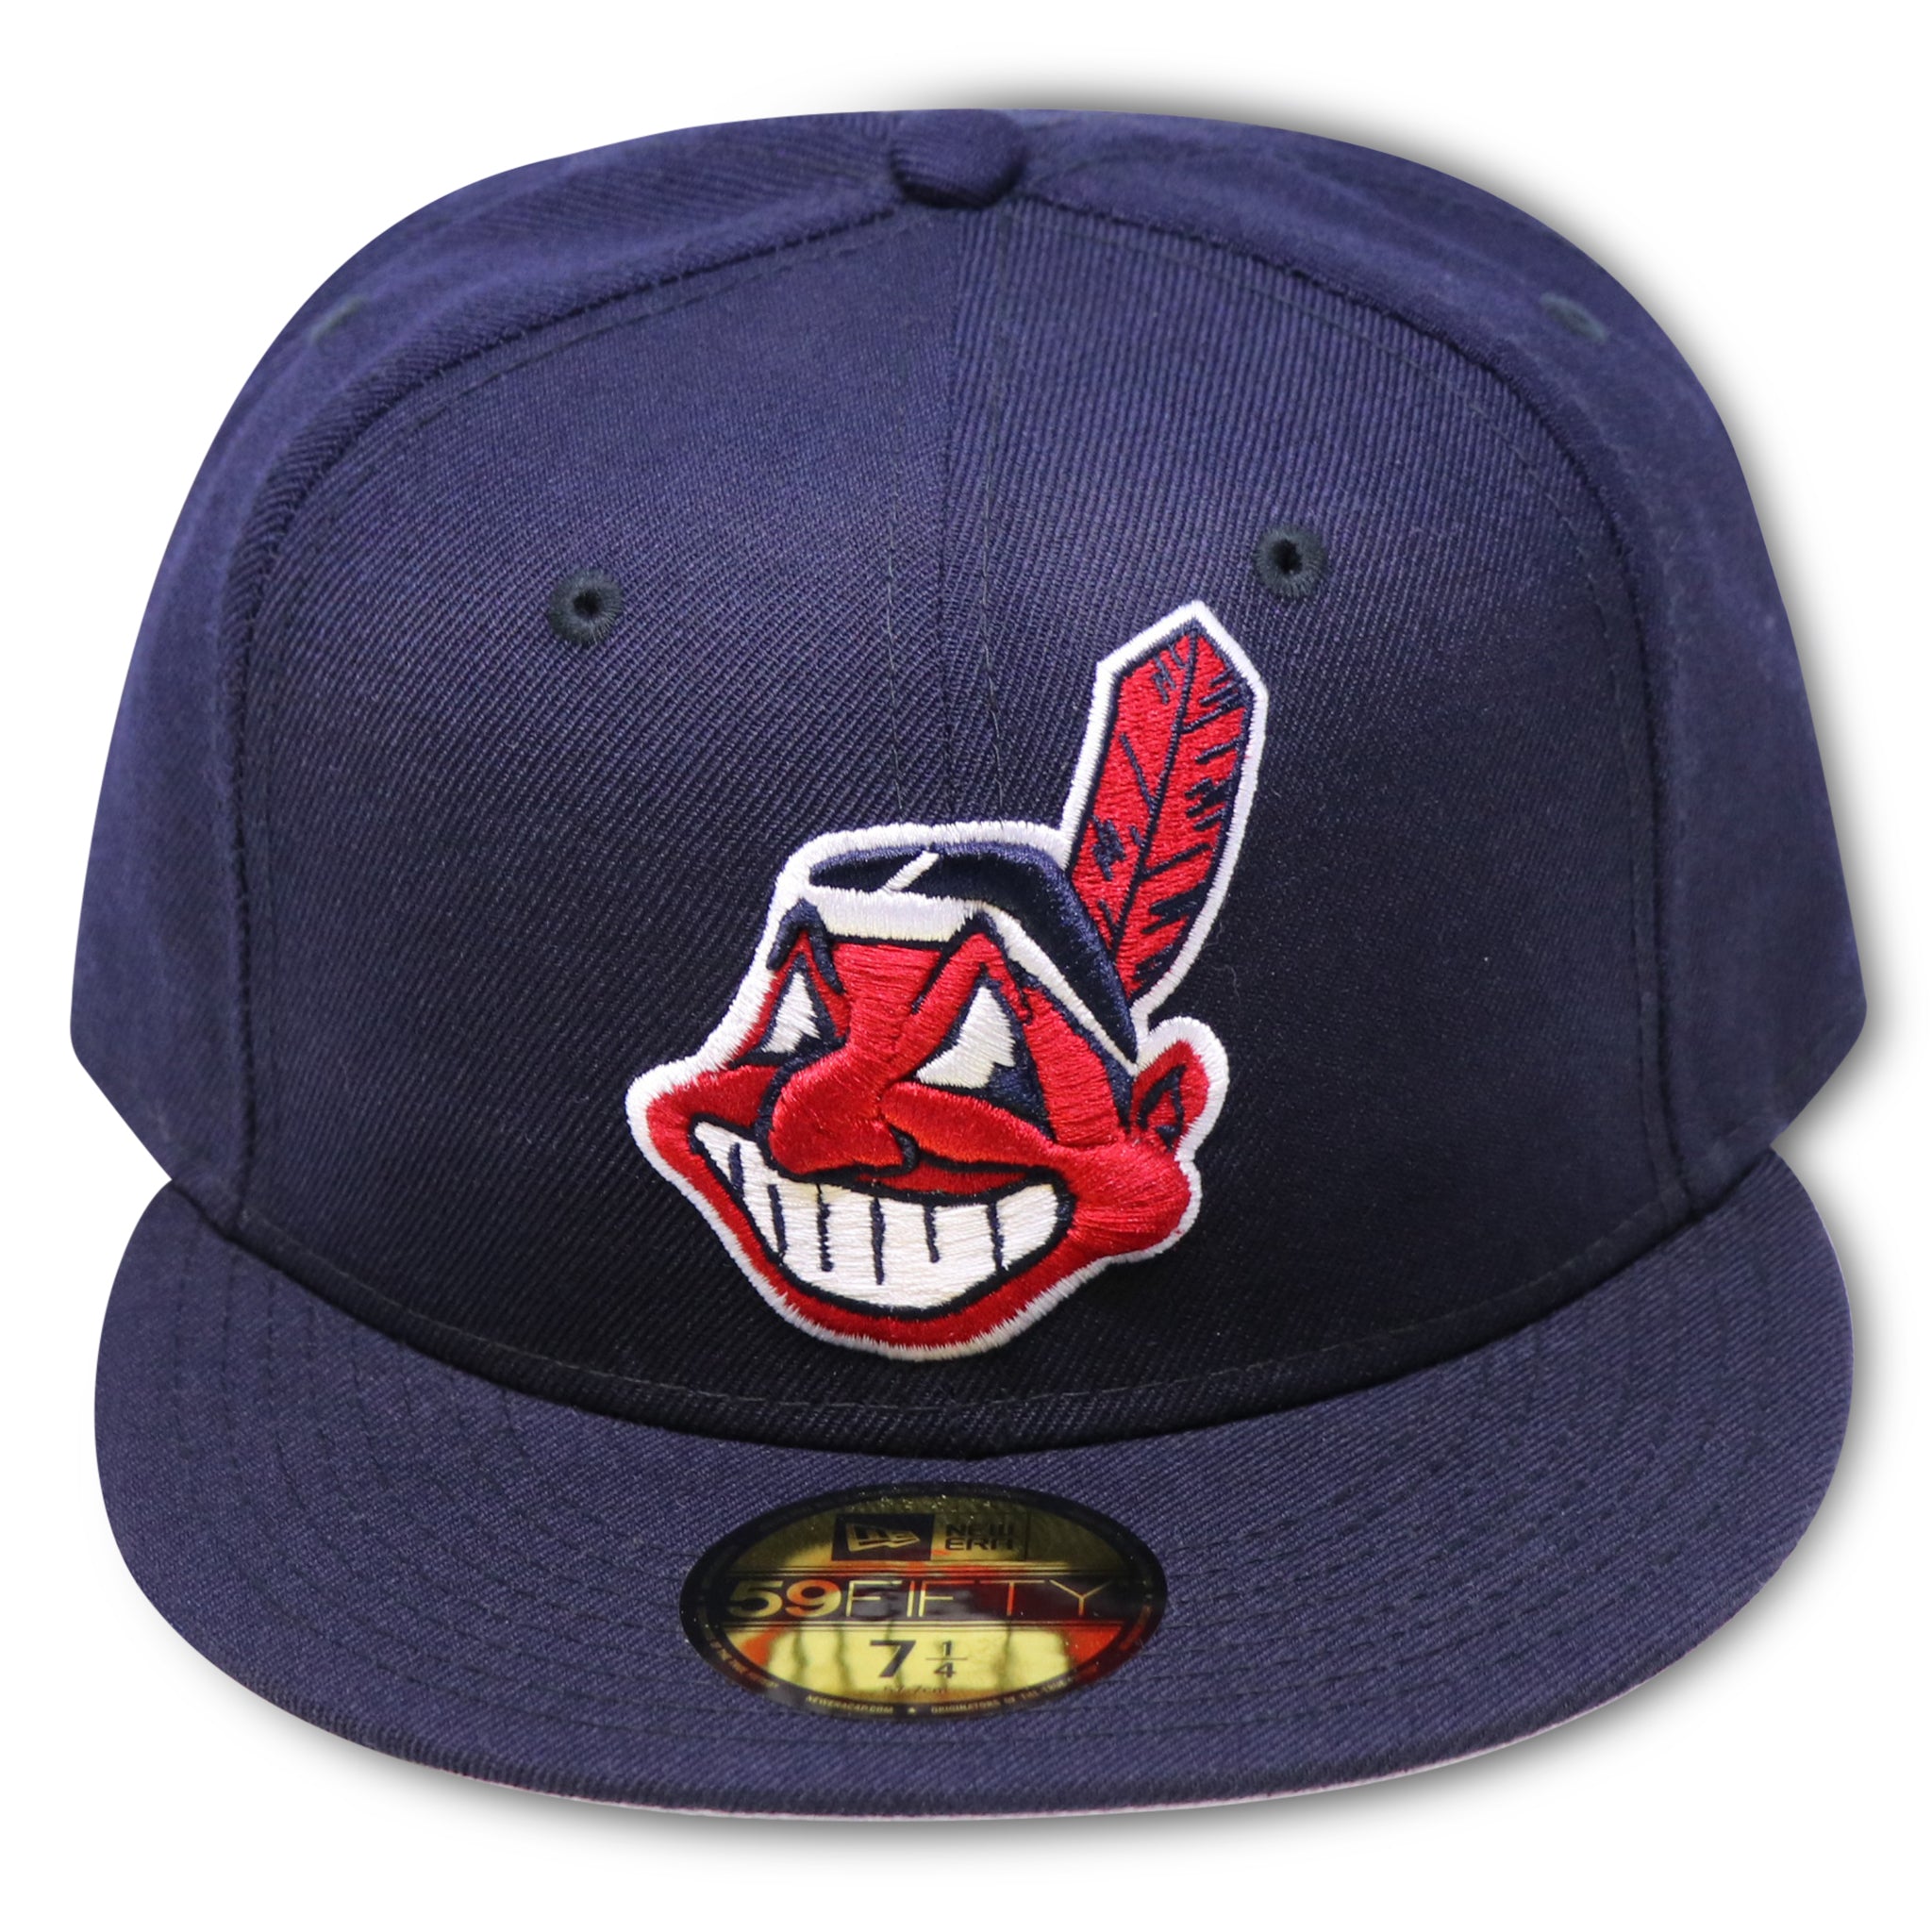 CLEVELAND INDIANS ROAD (ALL NAVY) 1999-2002 NEW ERA 59FIFTY FITTED